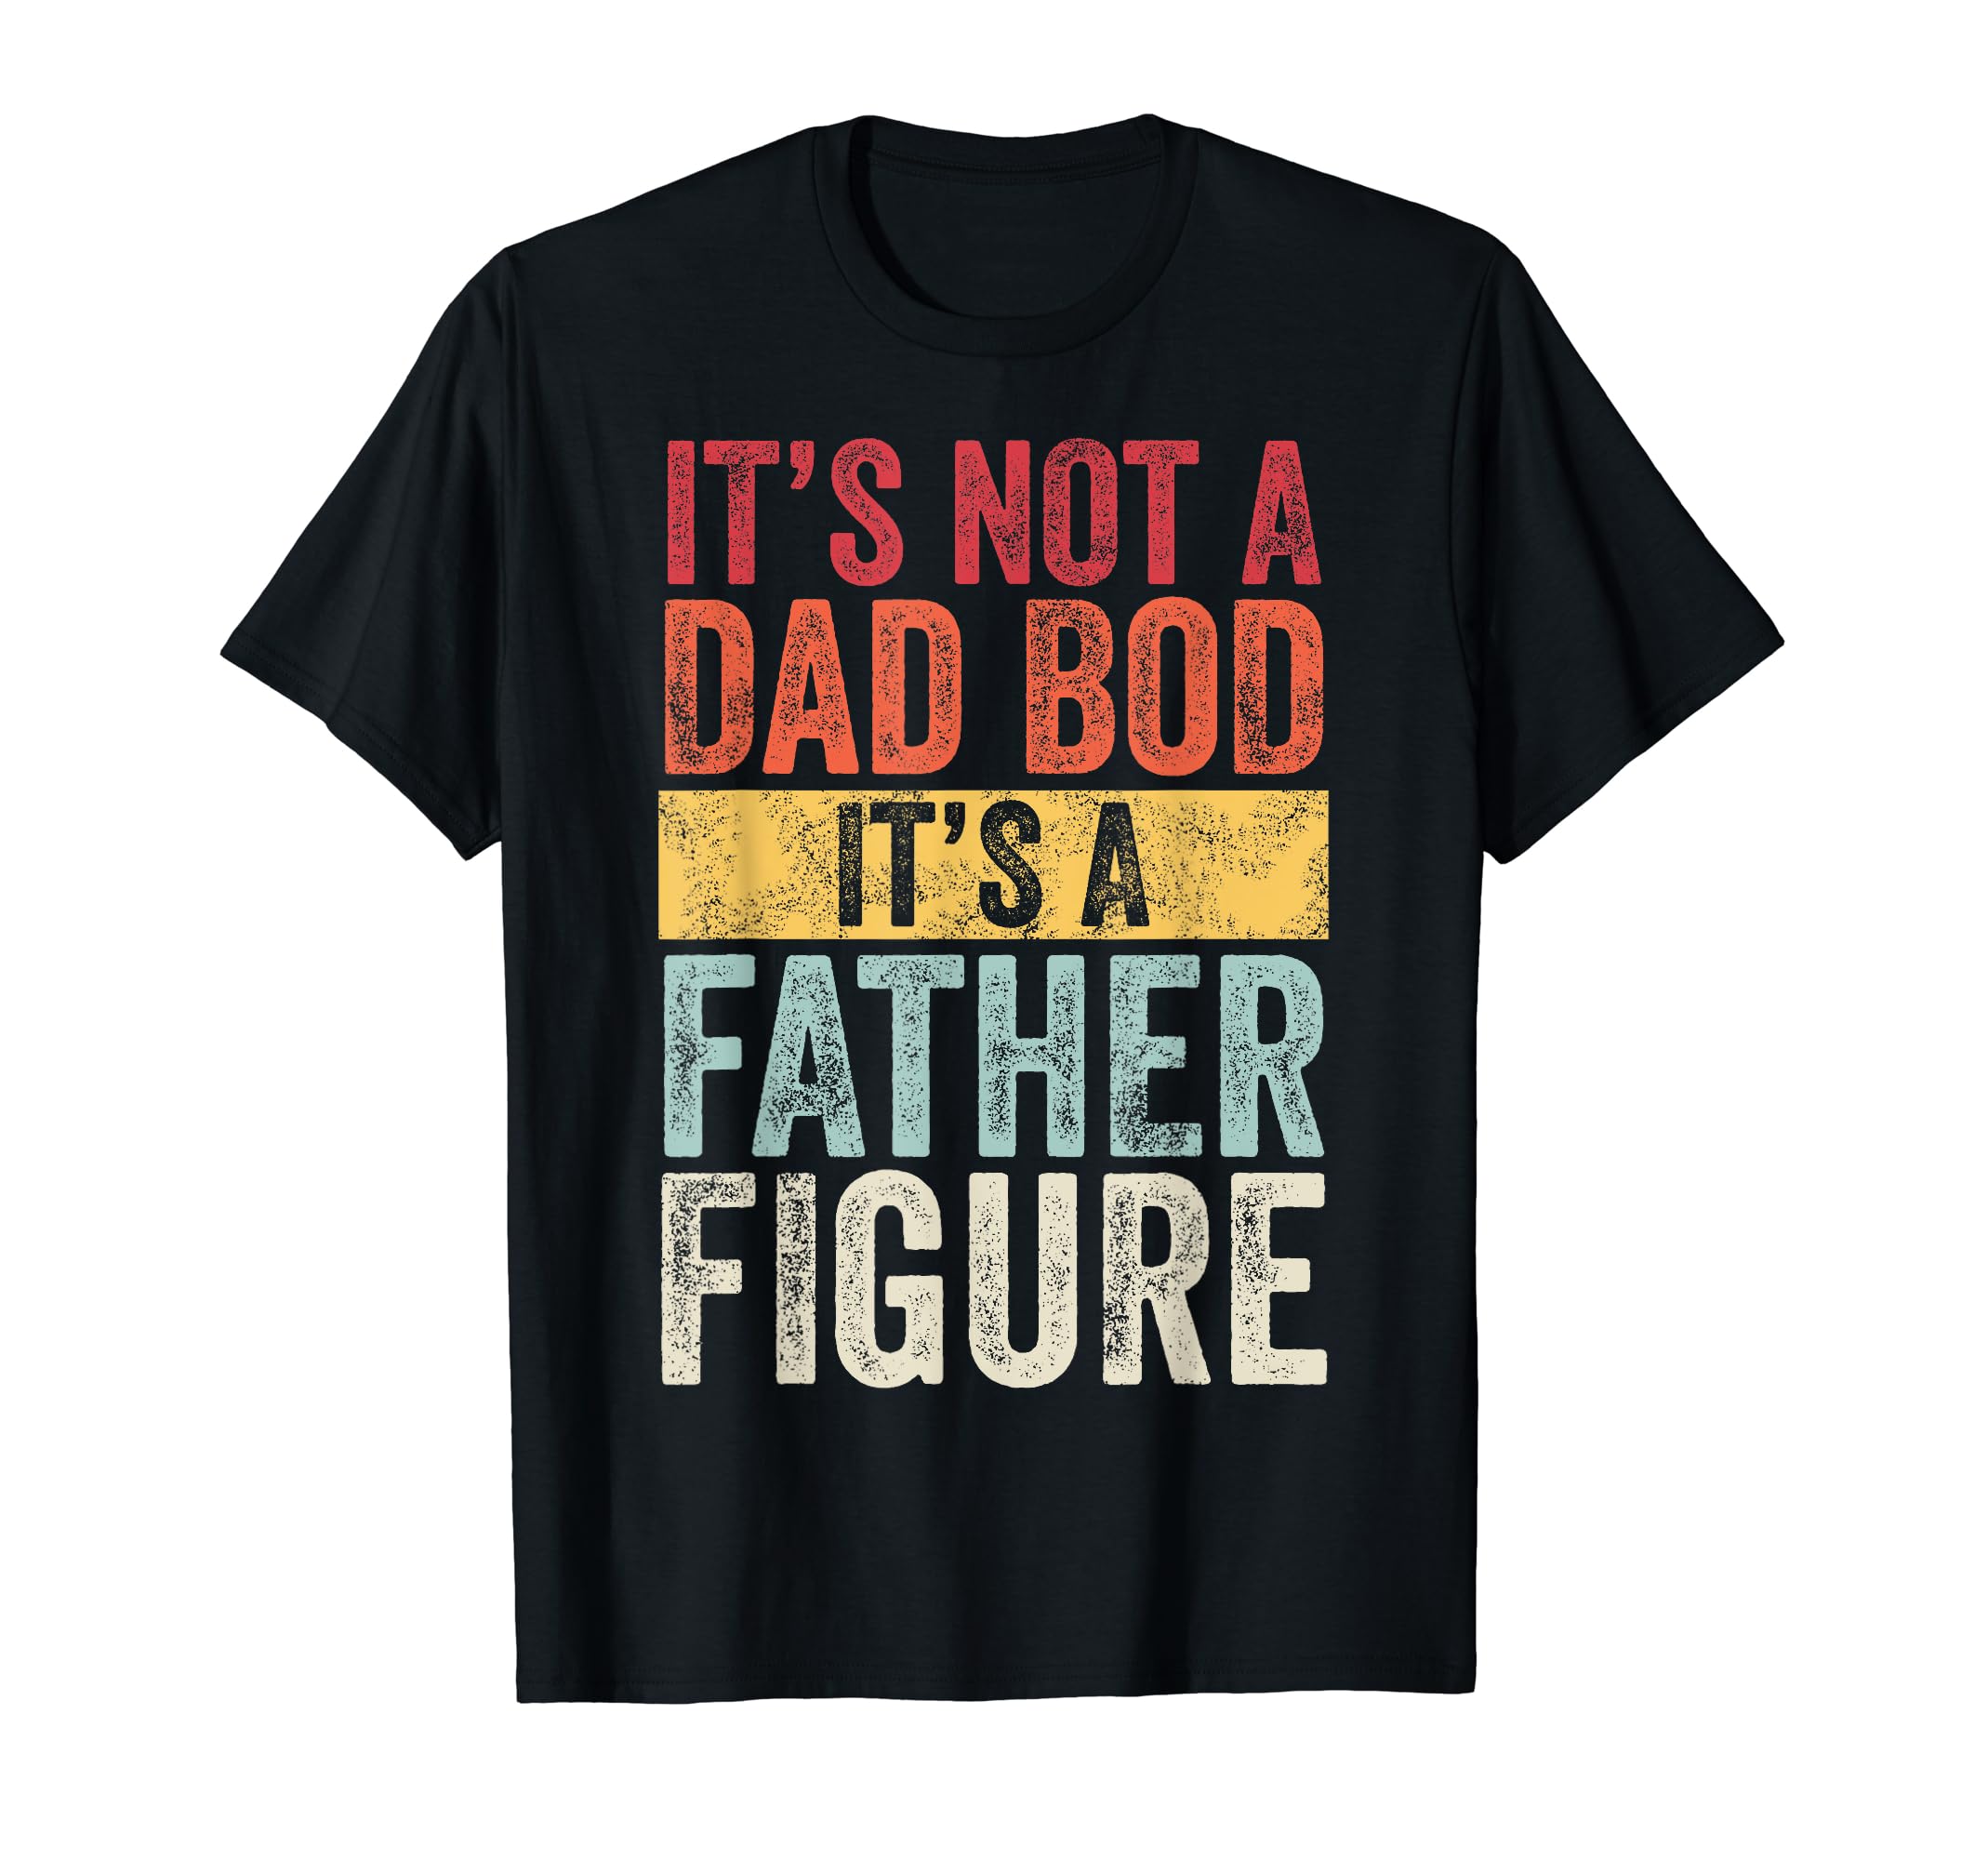 Mens It's Not A Dad Bod It's A Father Figure, Funny Retro Vintage,Short Sleeve T-Shirt